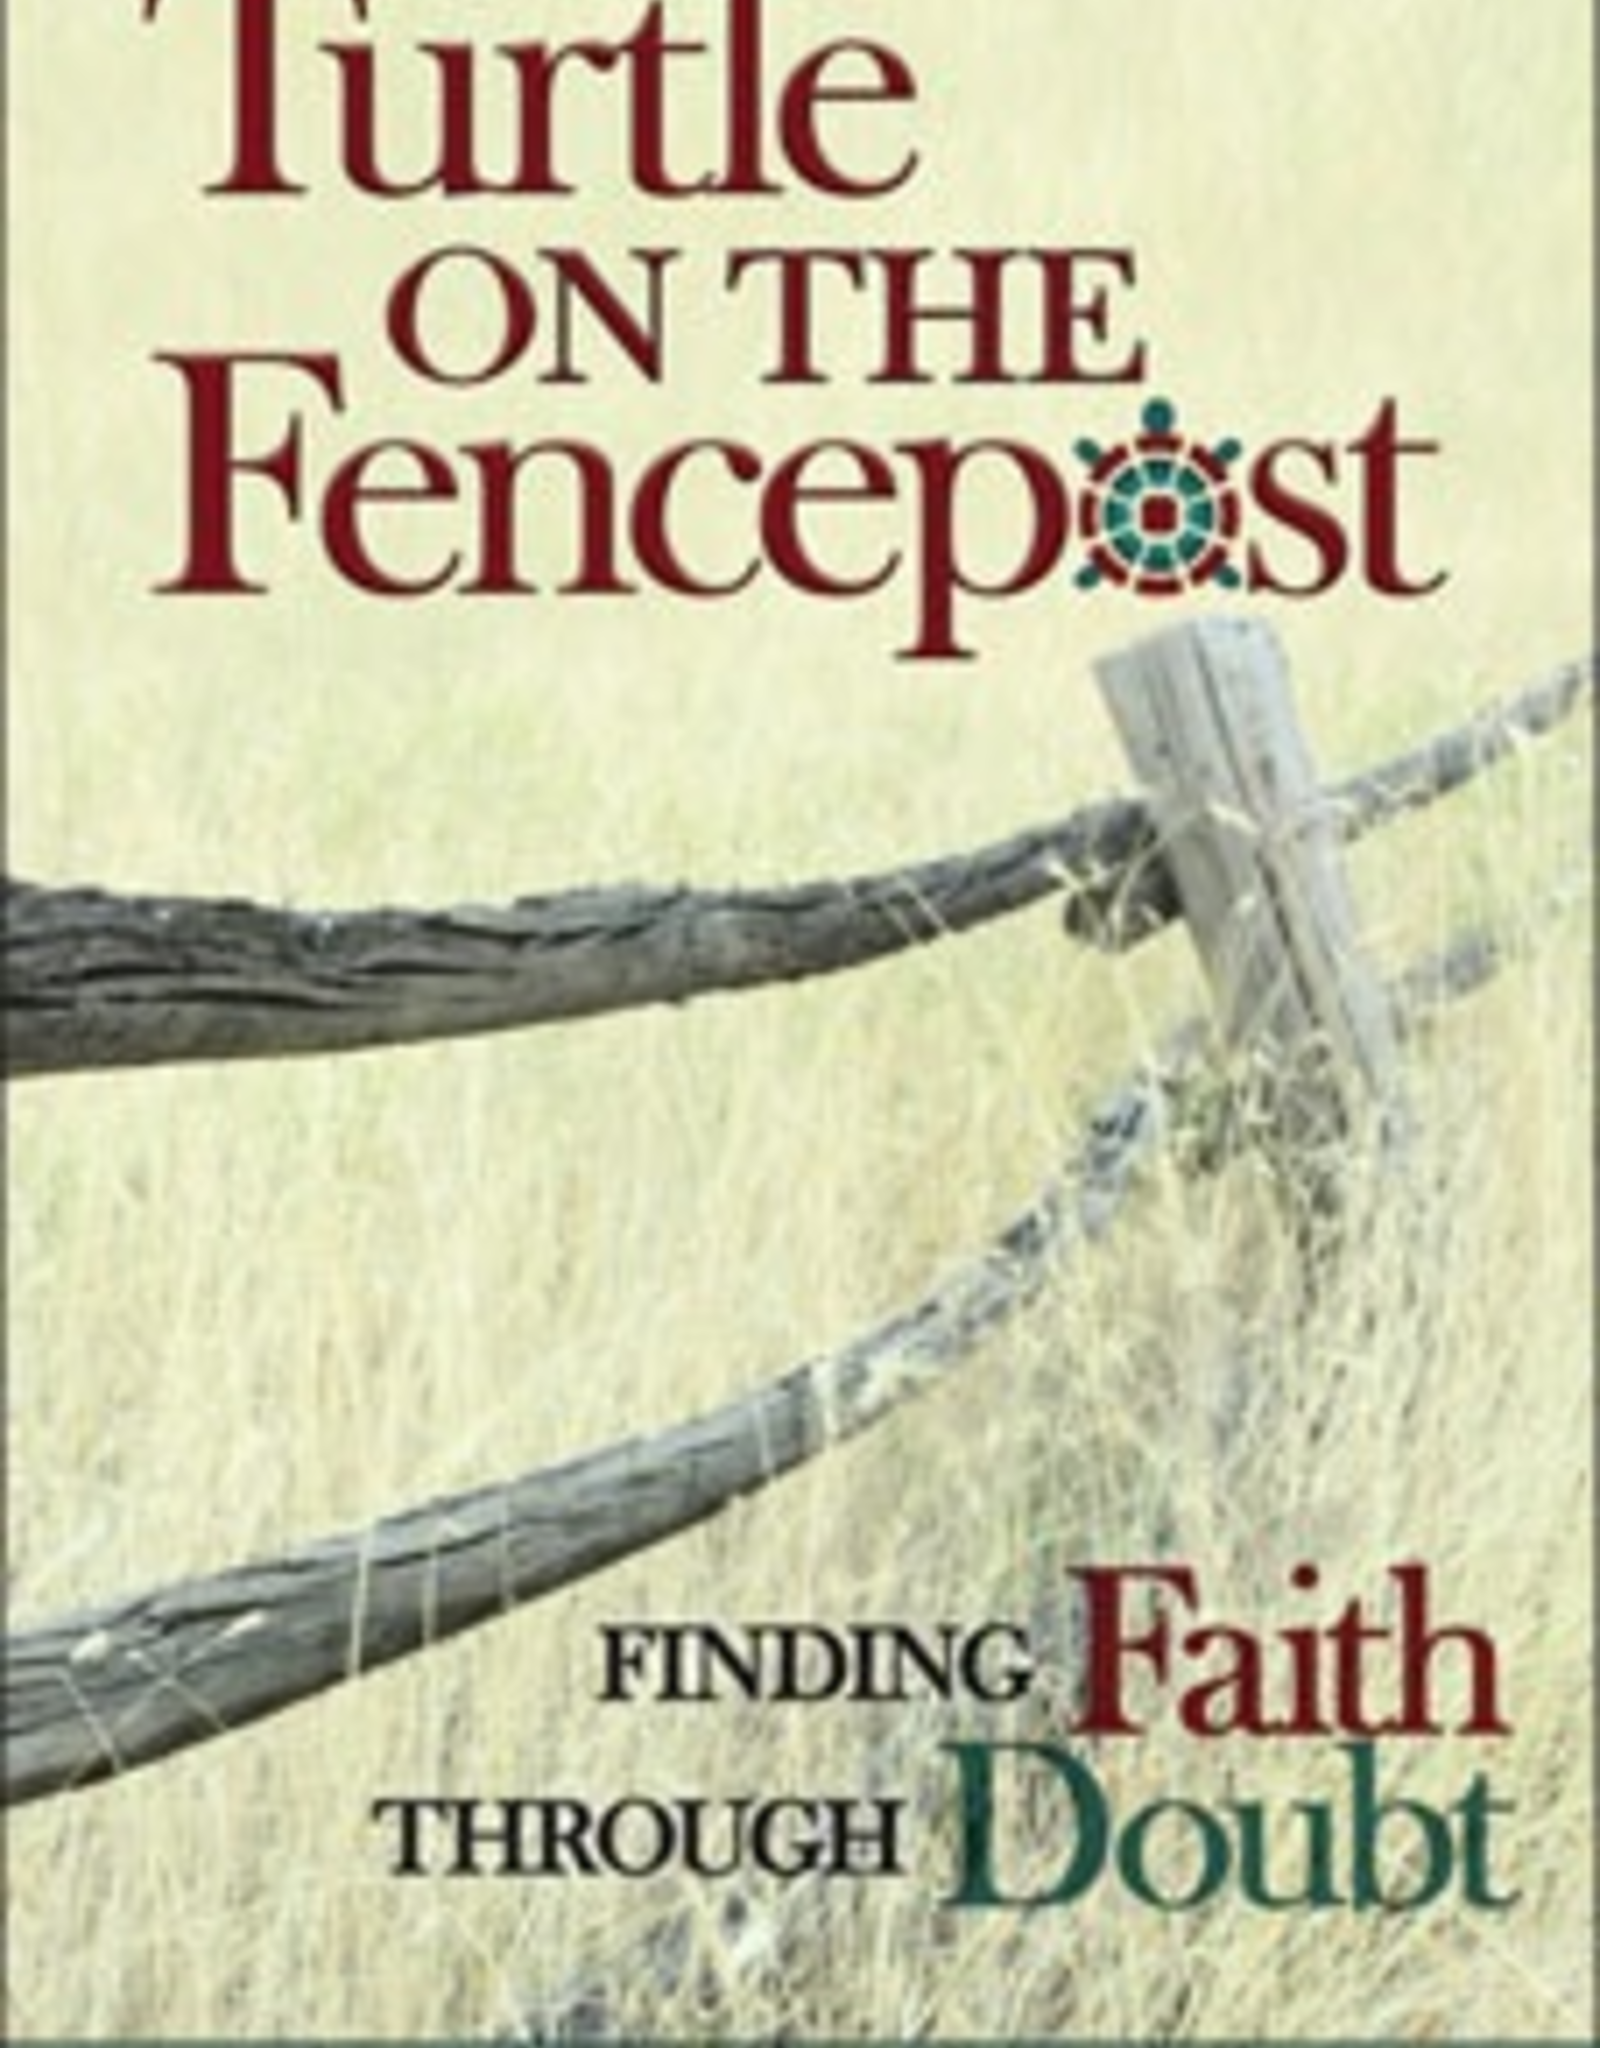 Liguori Turtle on the Fencepost:  Finding Faith Through Doubt, by Richard Petterson (paperback)